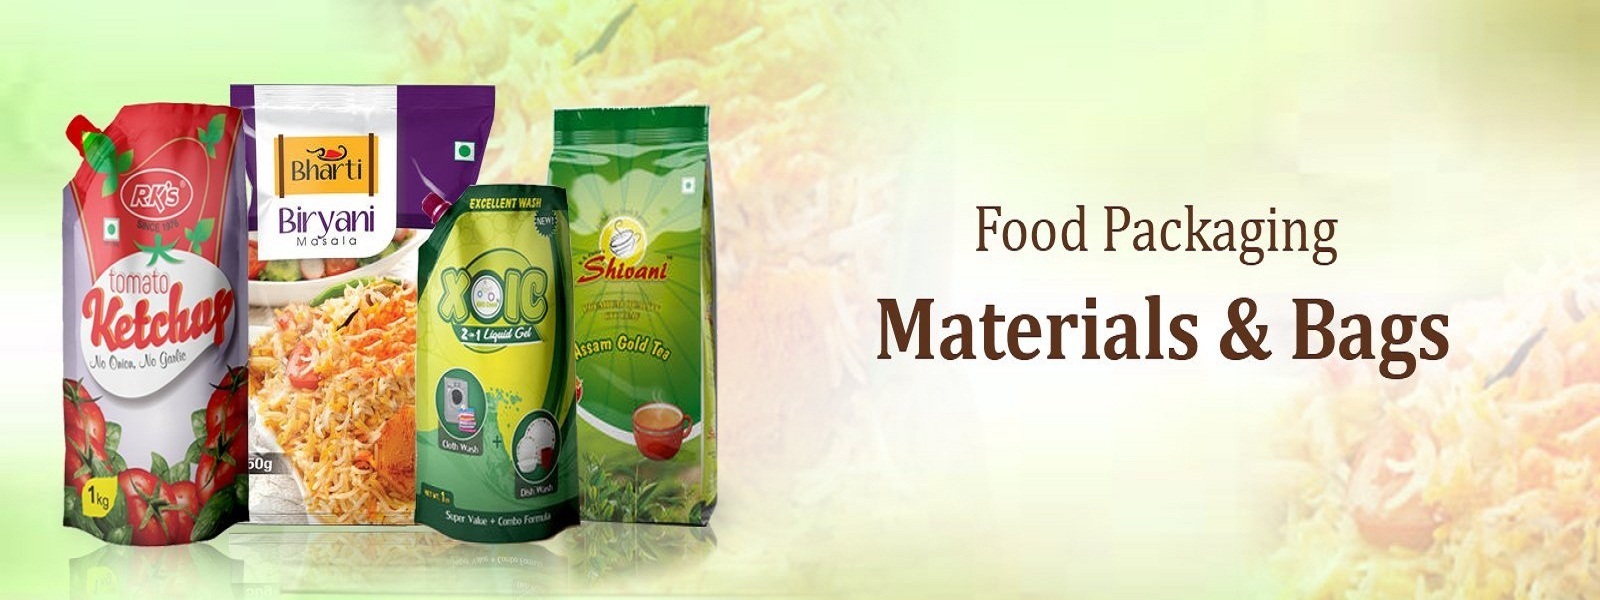 Thiruppathi Food Packing Materials & Bags